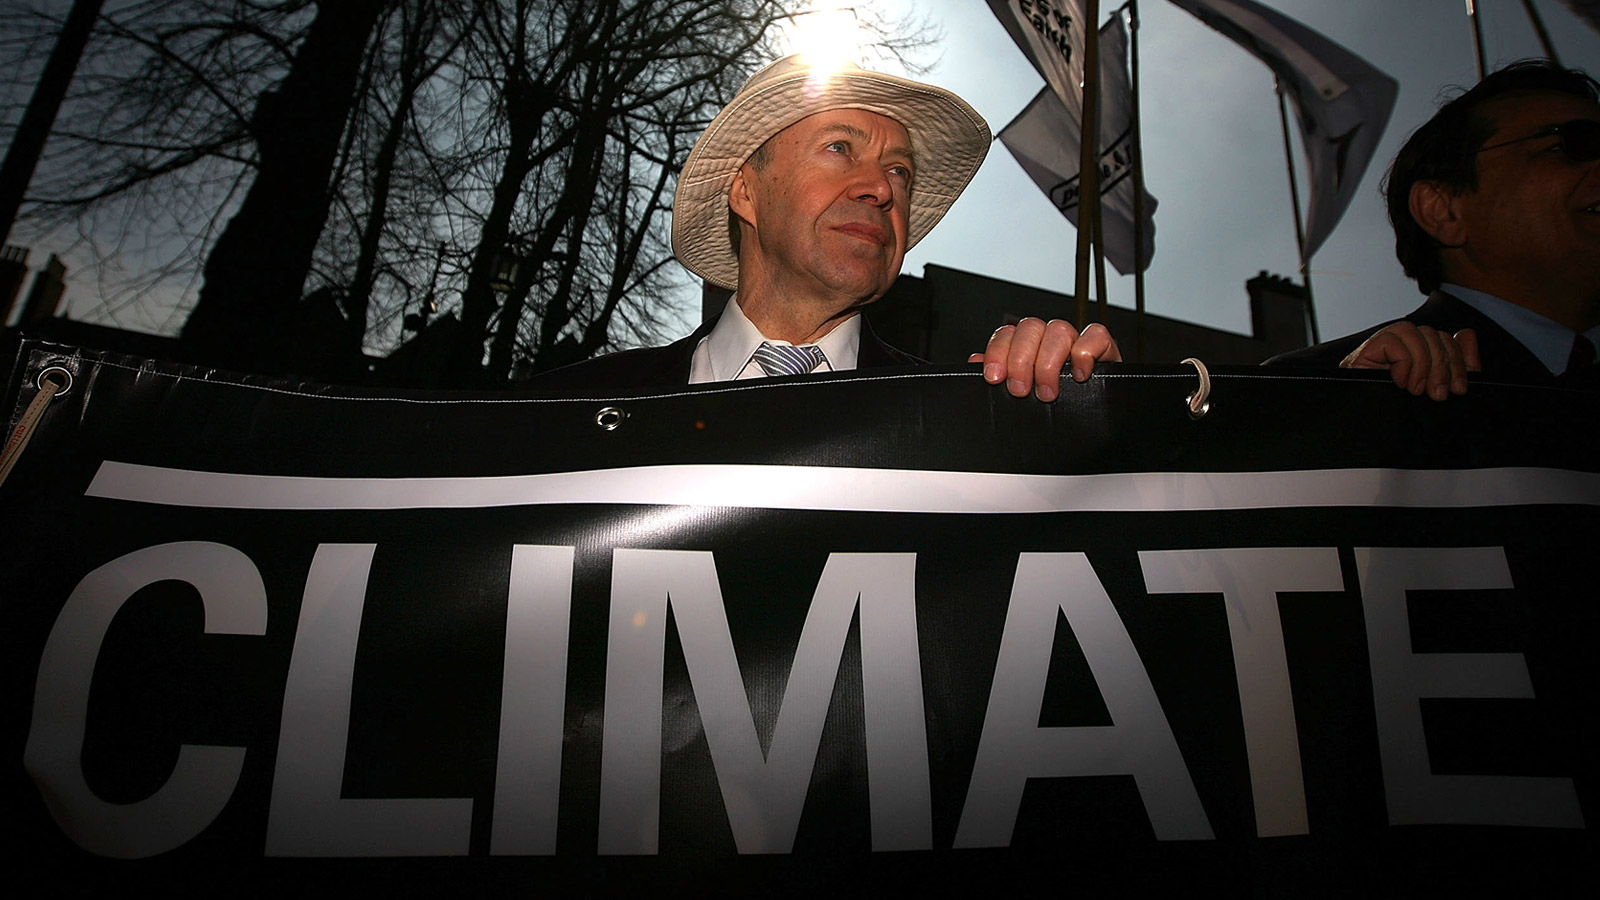 NASA scientist and climatologist James Hansen takes part in a mock funeral parade during a Climate Change Campaign Action Day on March 19, 2009 in Coventry, England.